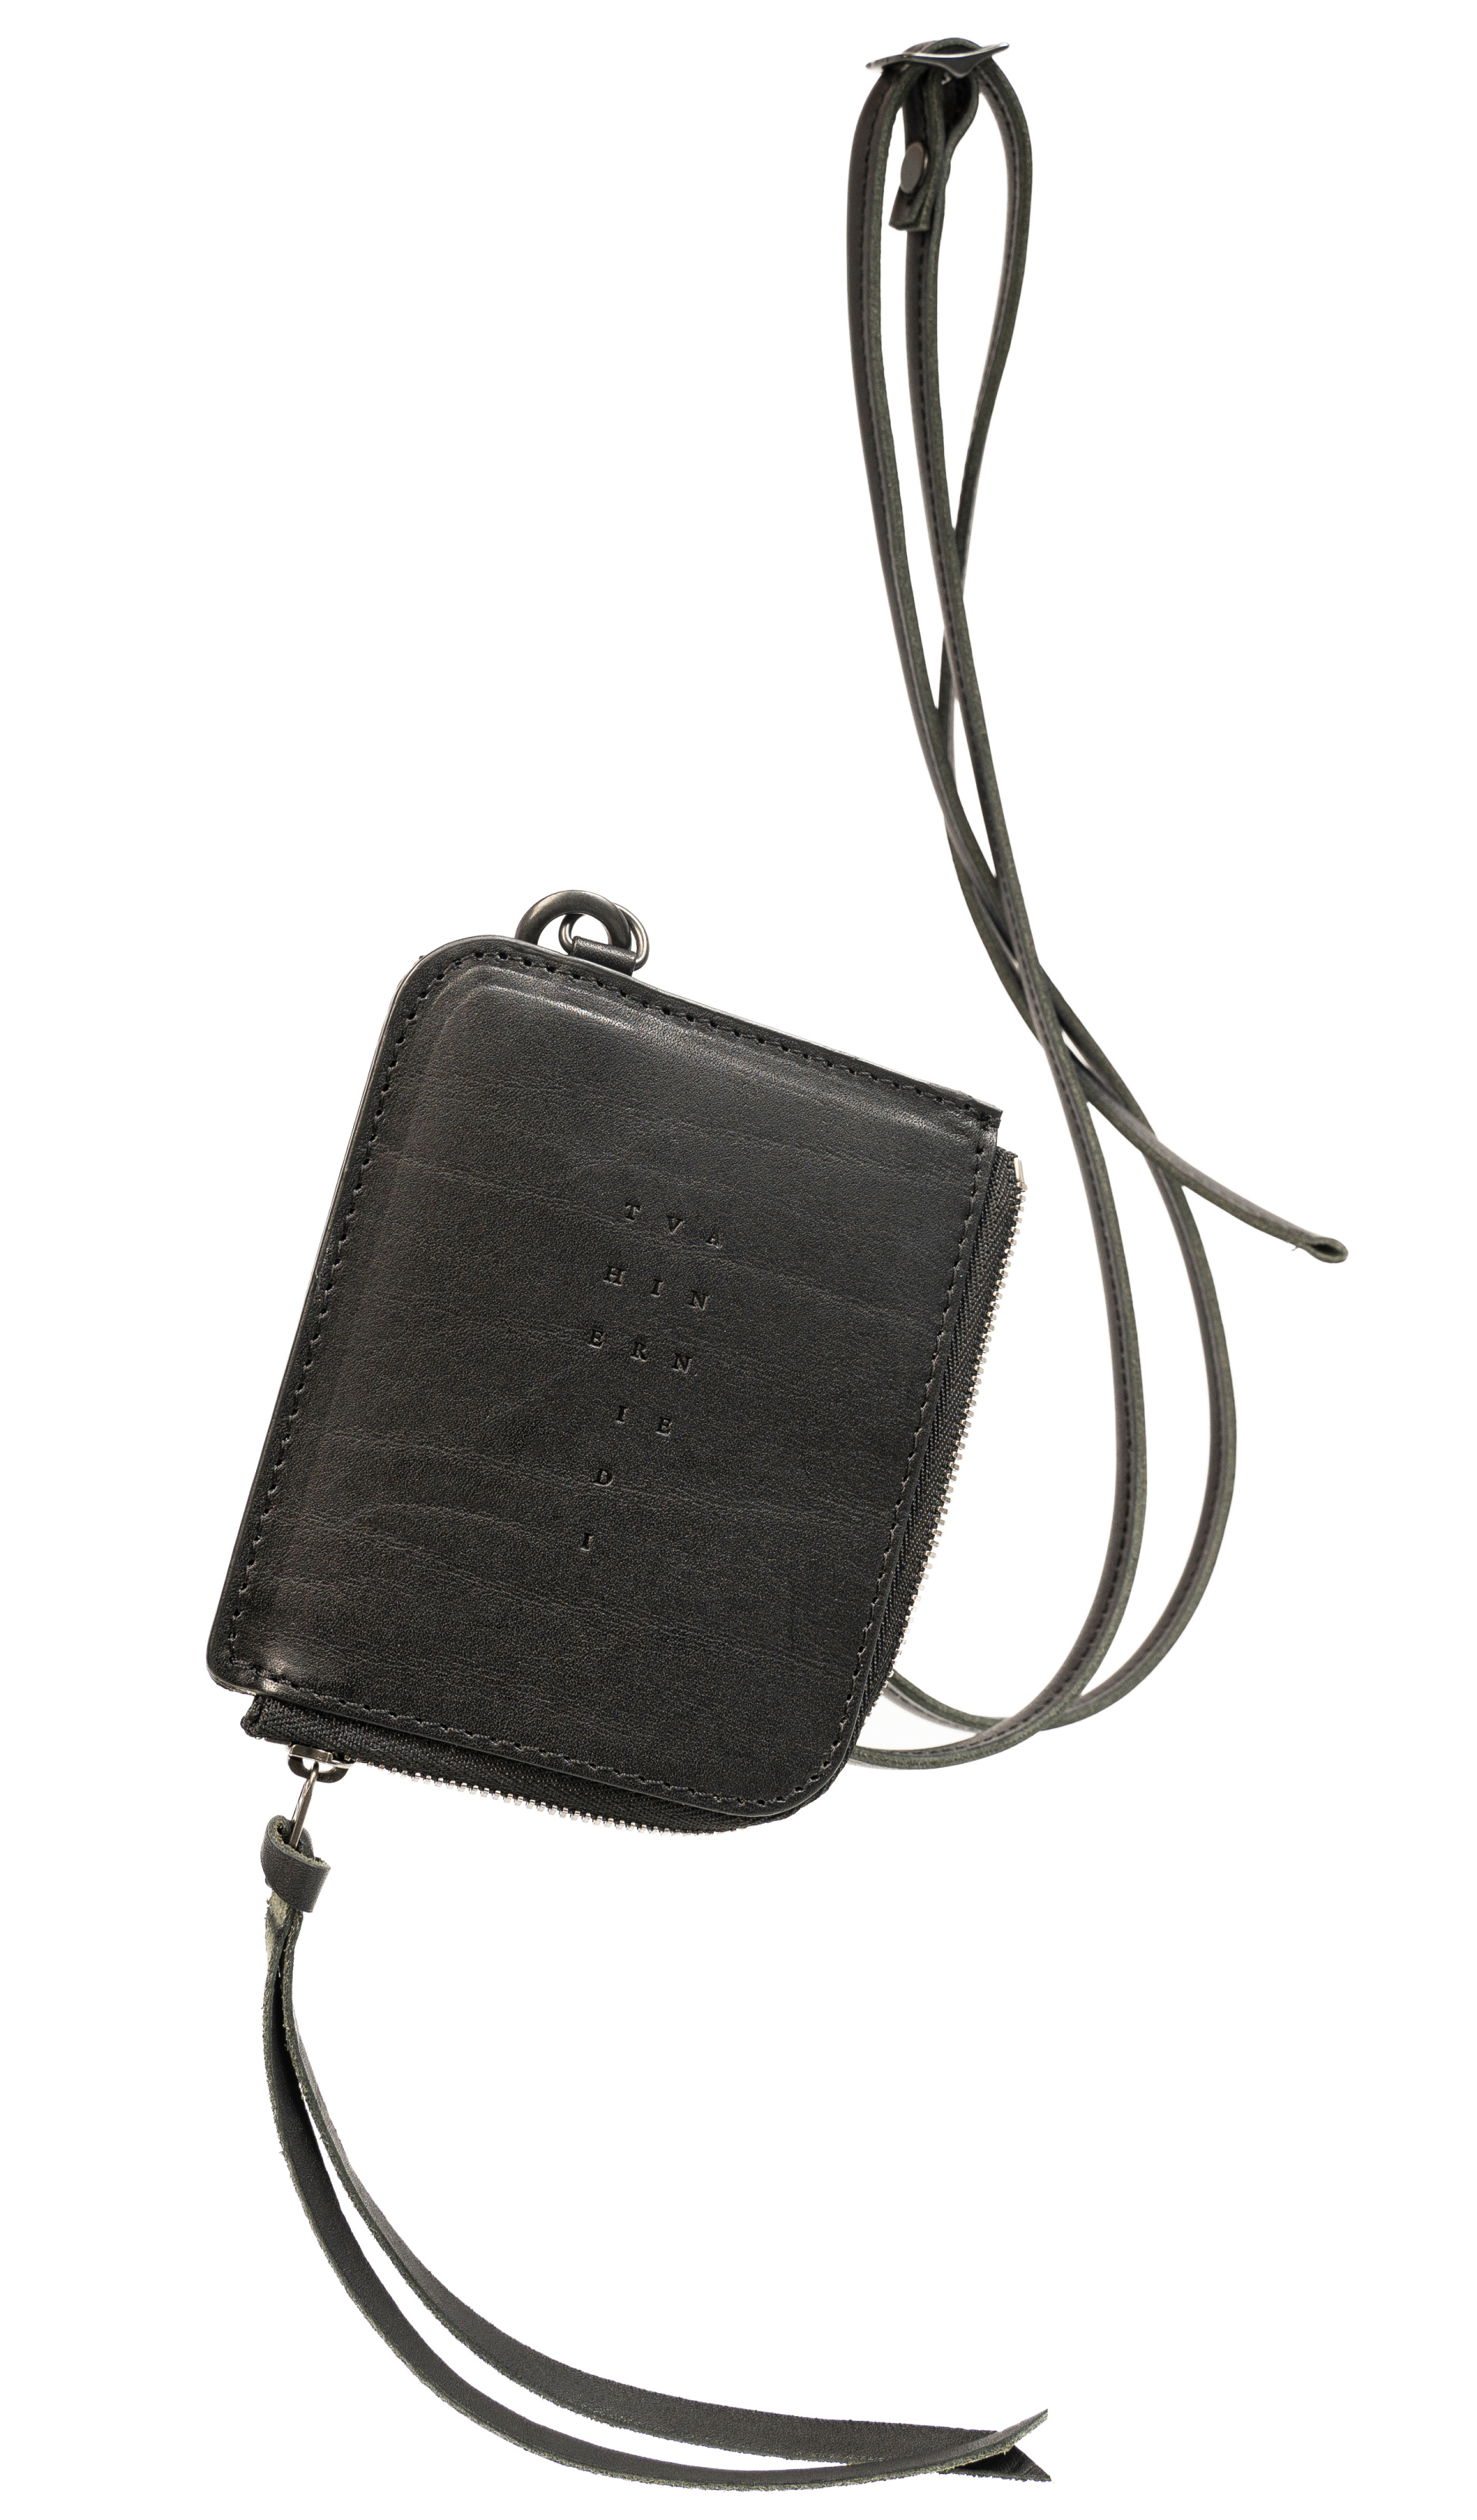 The Viridi-Anne Leather neck coin purse